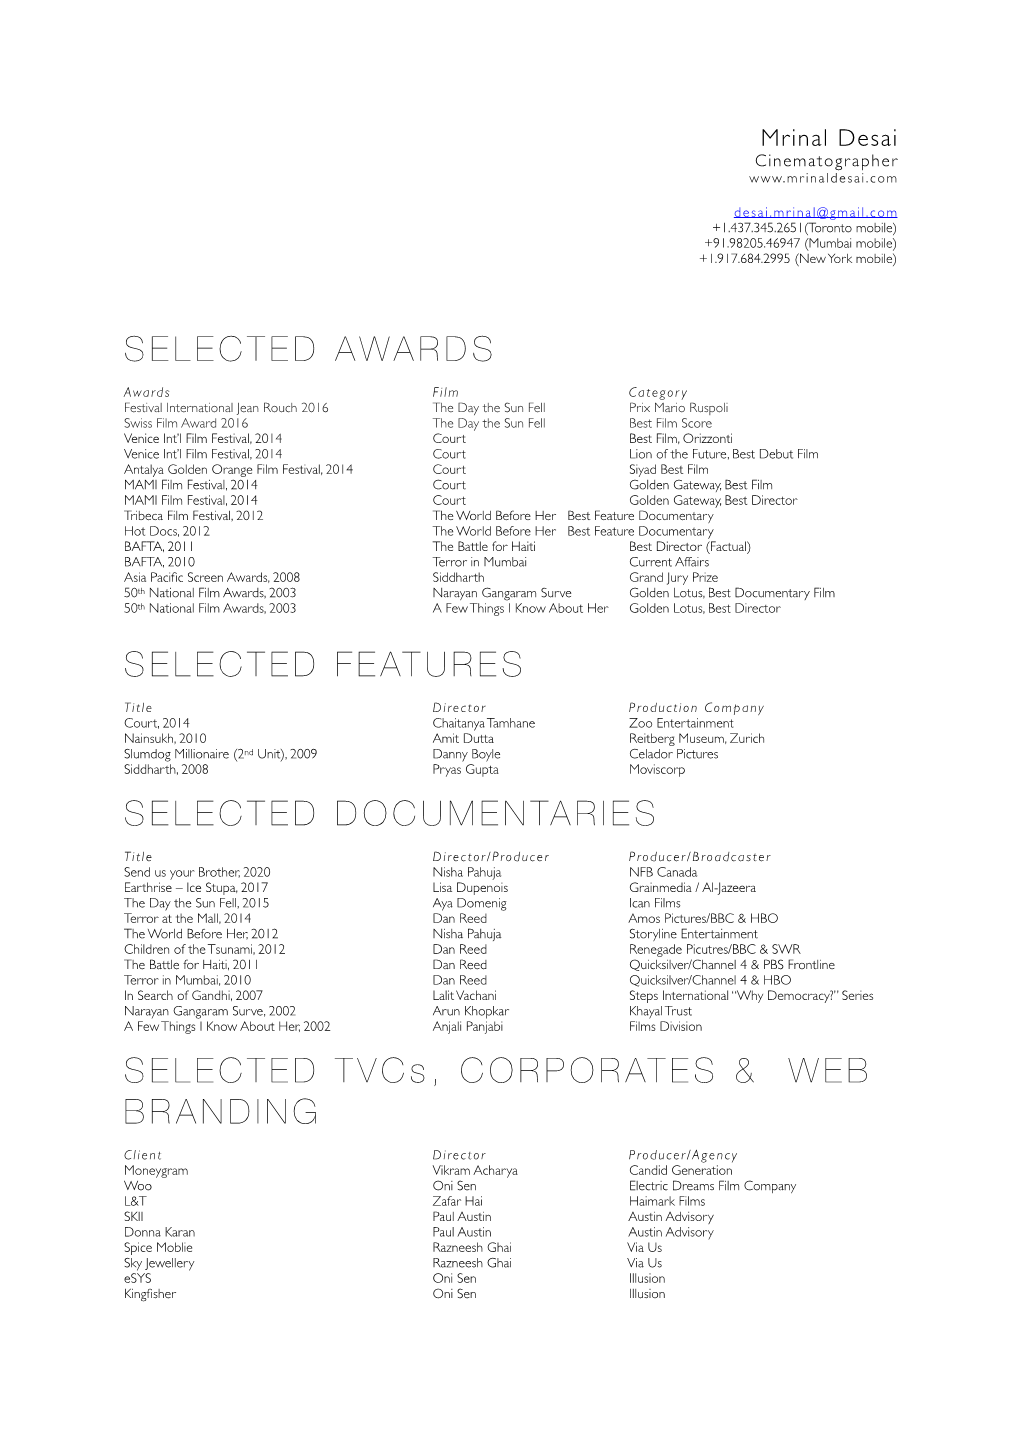 SELECTED AWARDS SELECTED FEATURES SELECTED DOCUMENTARIES SELECTED Tvcs, CORPORATES & WEB BRANDING